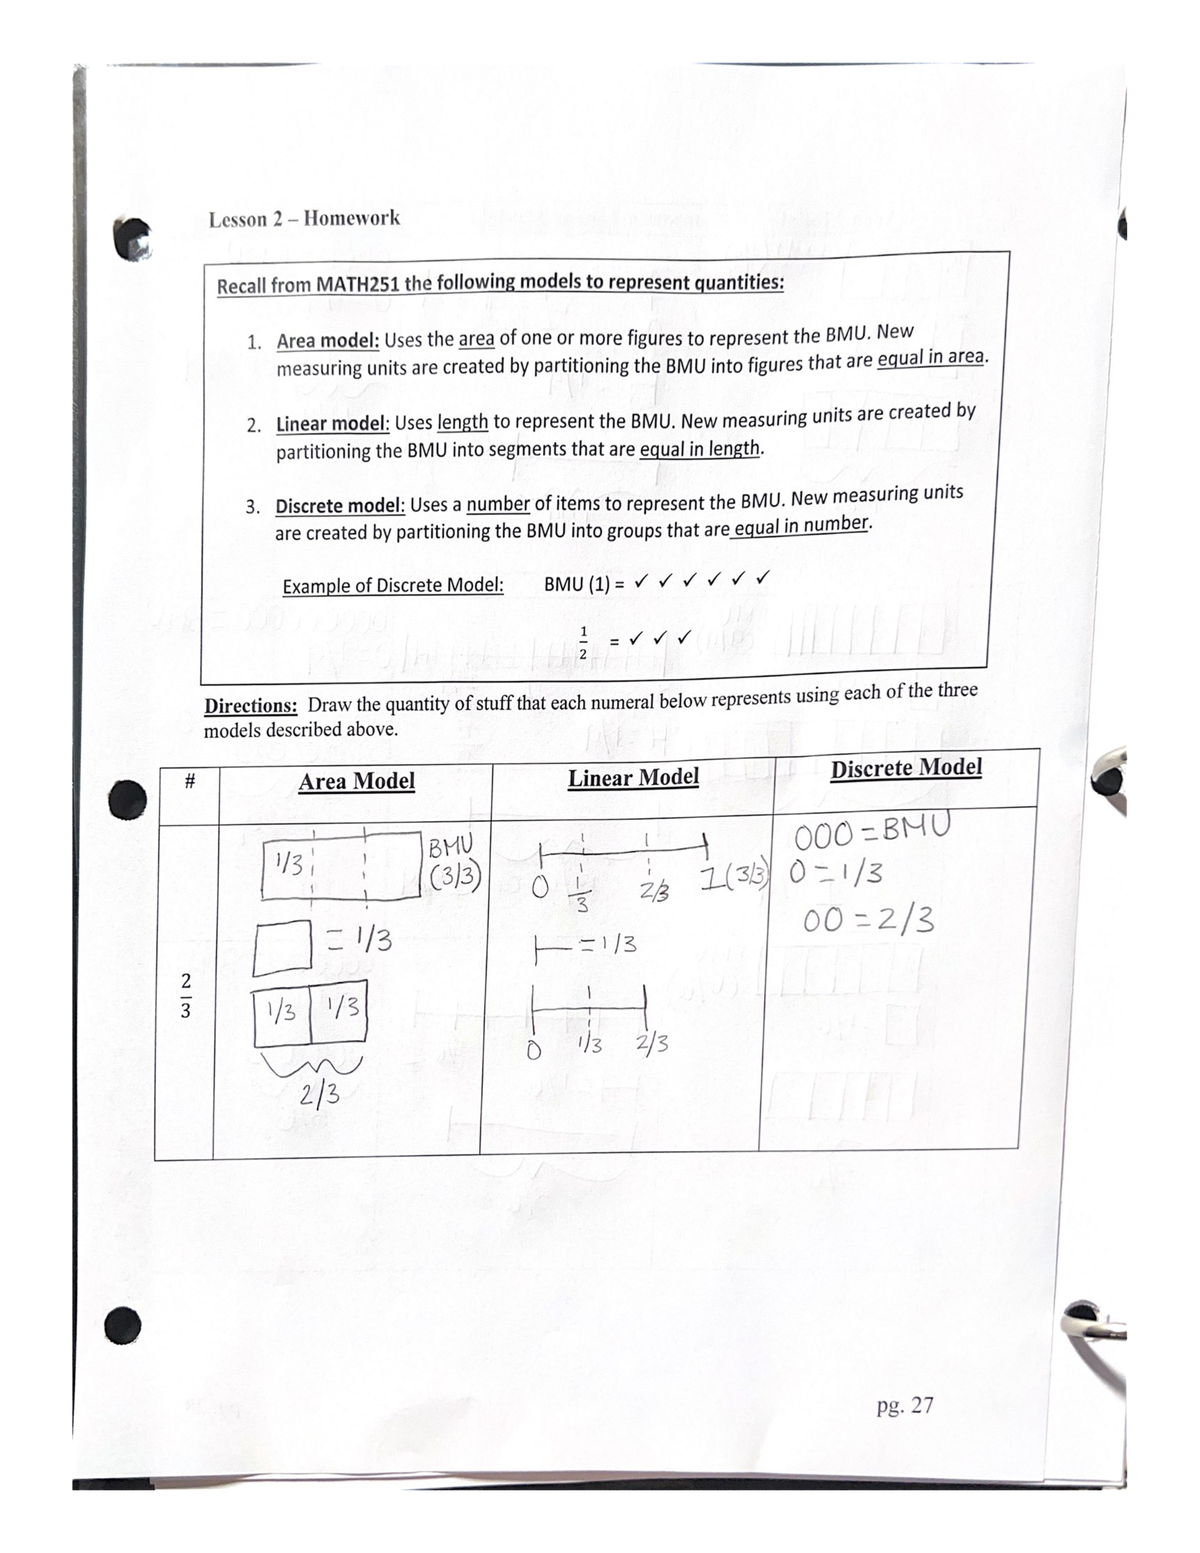 my homework lesson 2 estimate products answer key